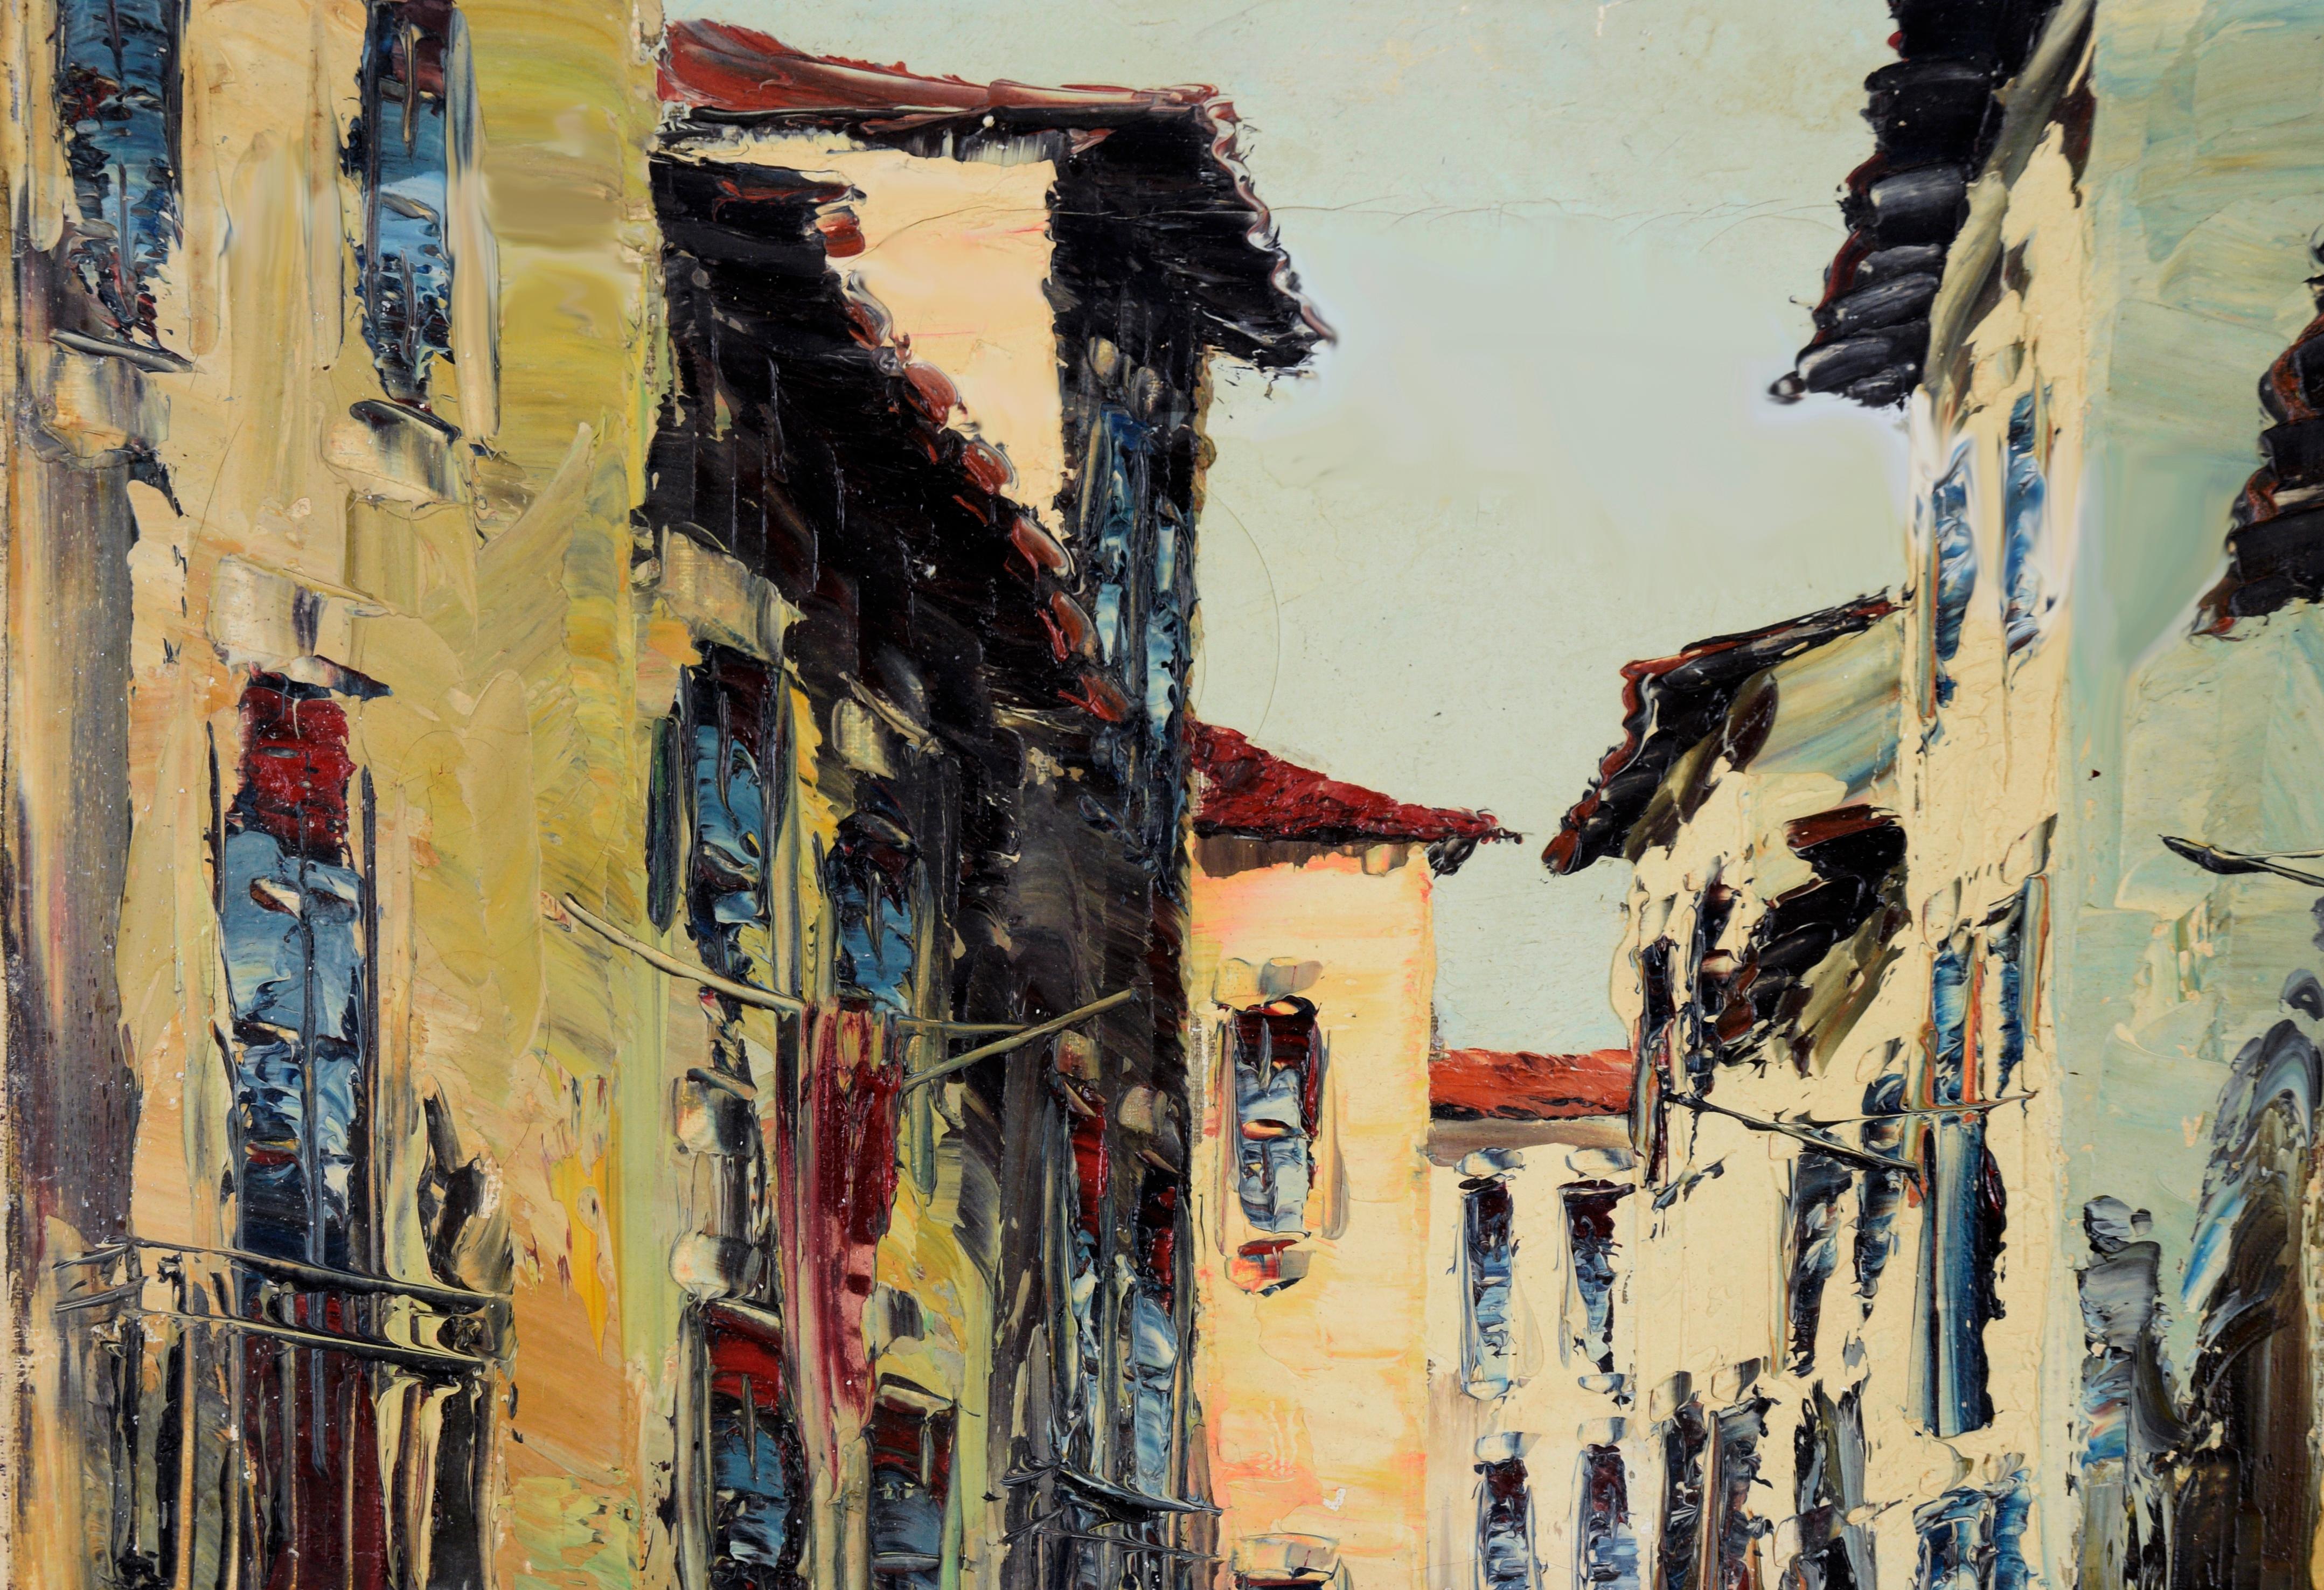 Portuguese Street Scene Vintage Oil on Canvas - Painting by Lucas Teixeira